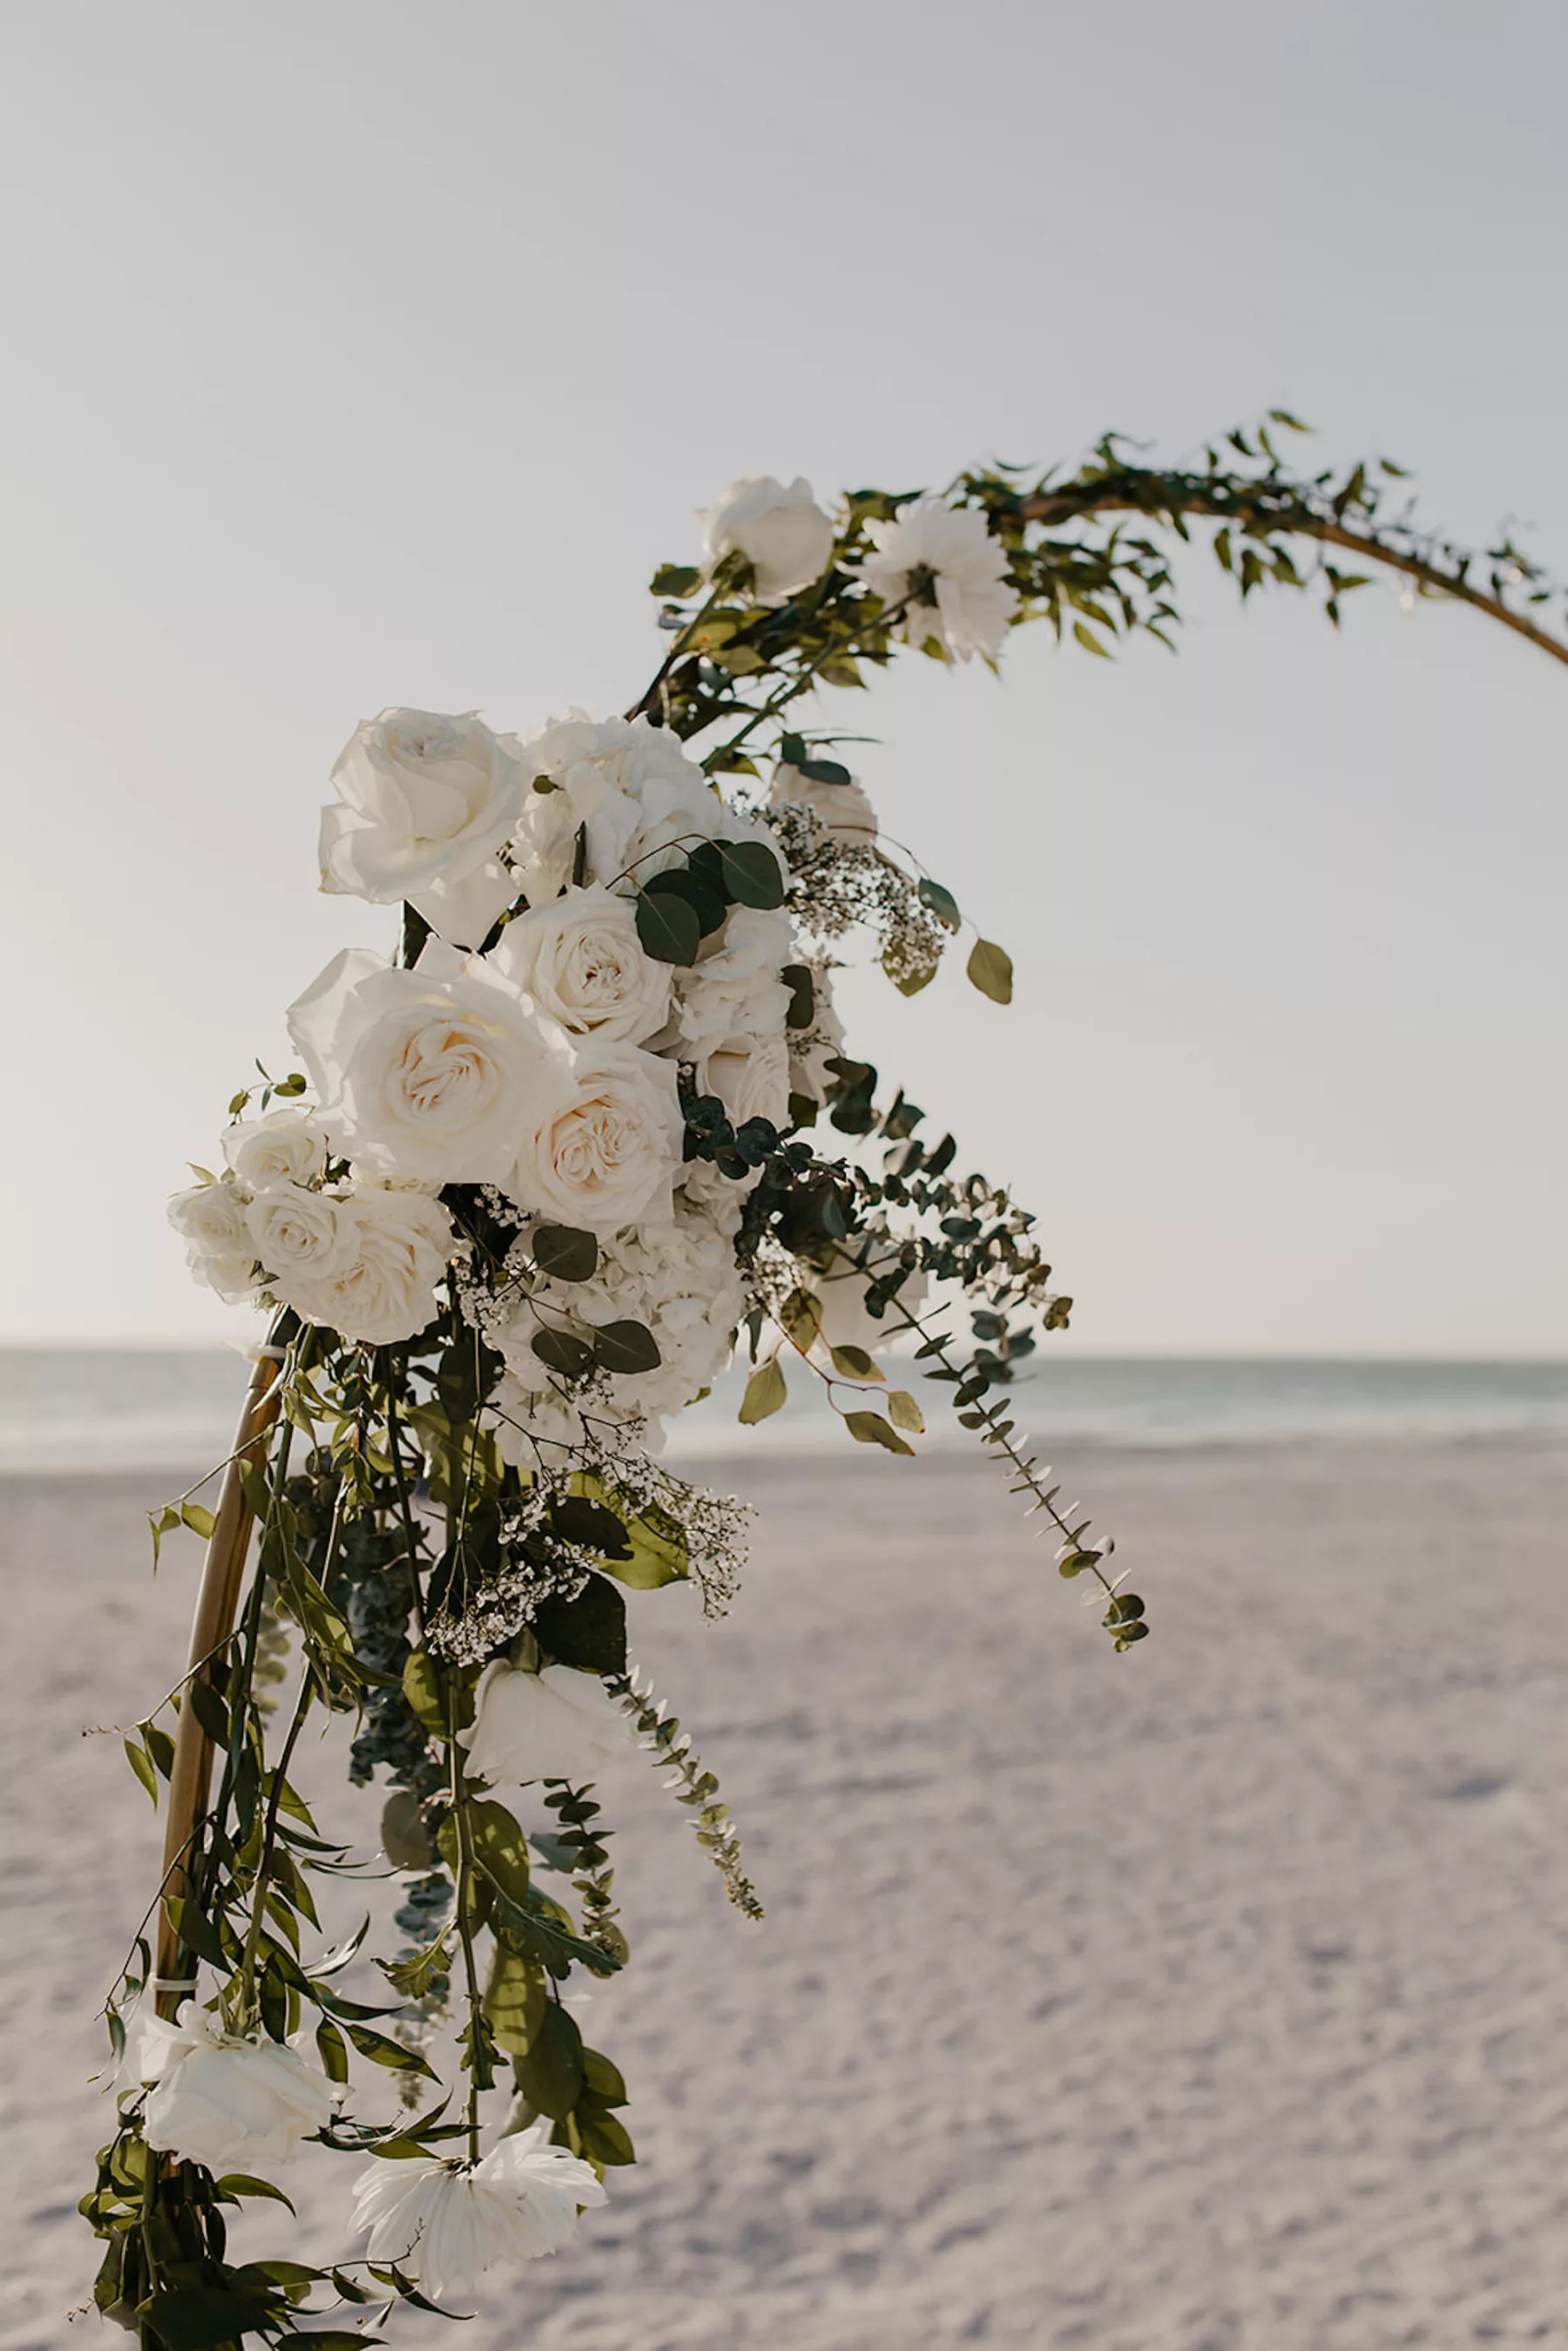 Elegant Beach Wedding Ceremony Arch with White Roses, Baby's Breath, and Greenery Inspiration | Tampa Bay Florist Lemon Drops